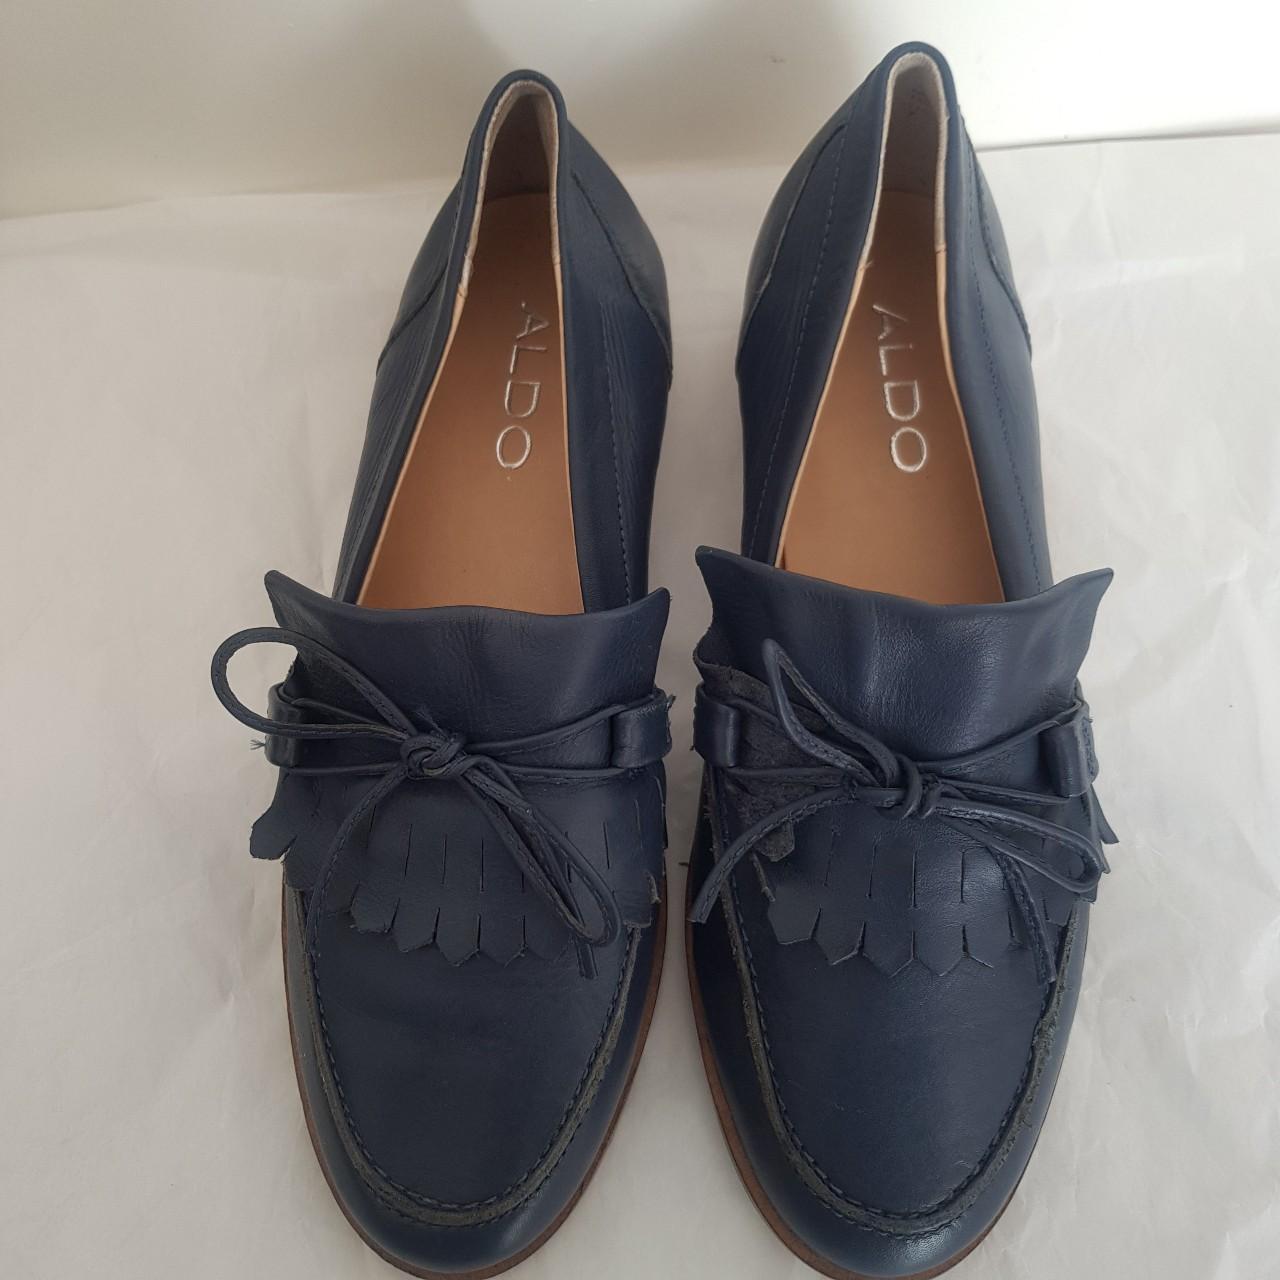 ALDO LEATHER LOAFERS WITH TASSELS. BRAND NEW / NO... - Depop